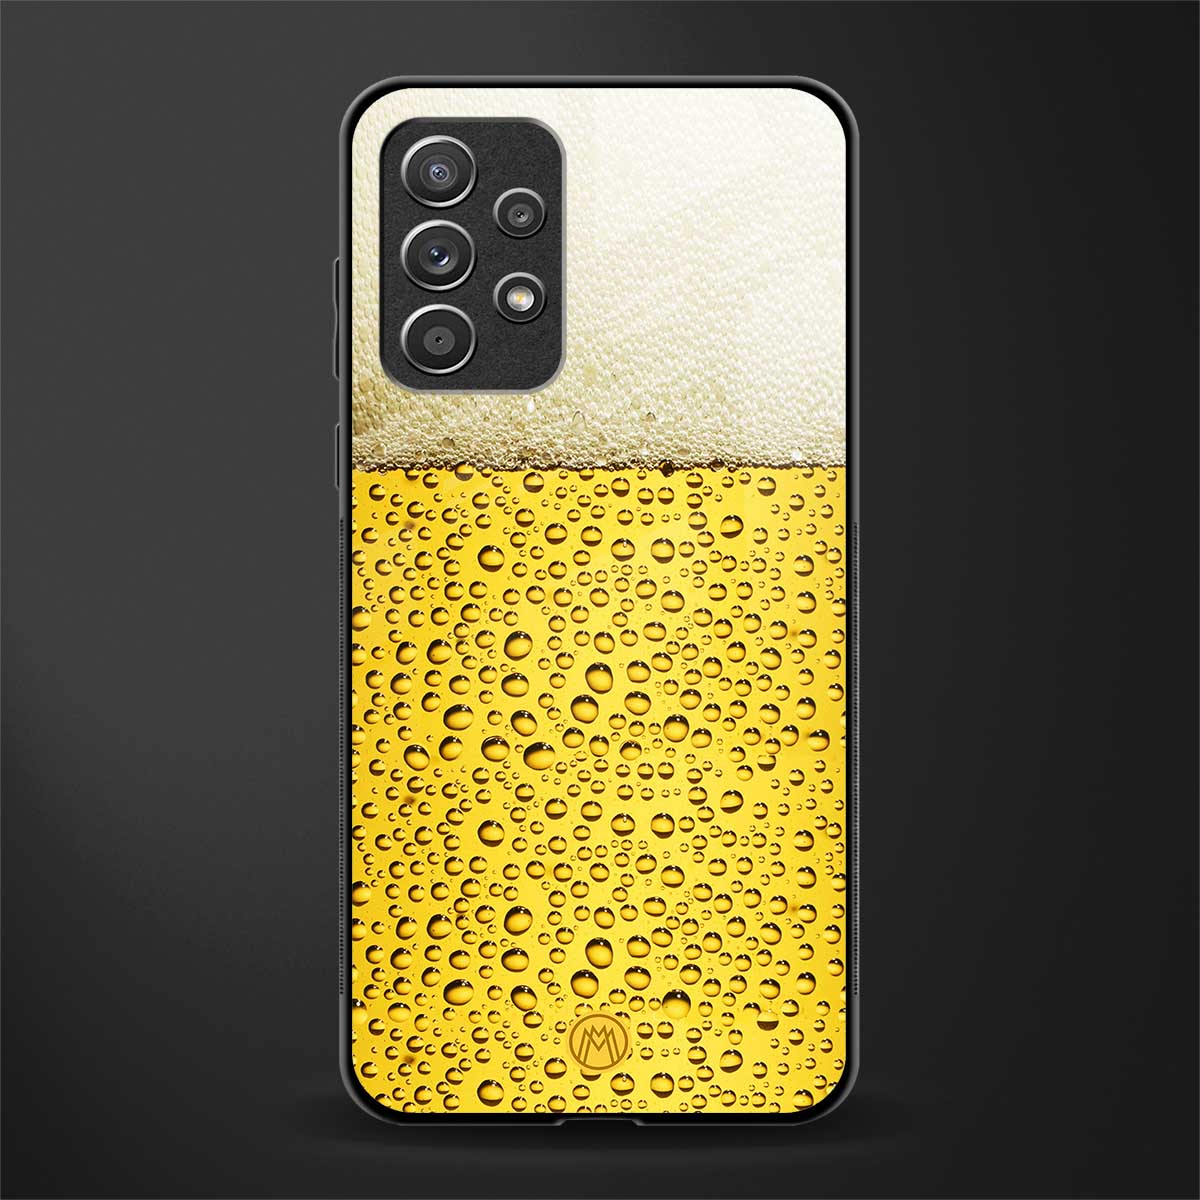 fizzy beer glass case for samsung galaxy a52 image